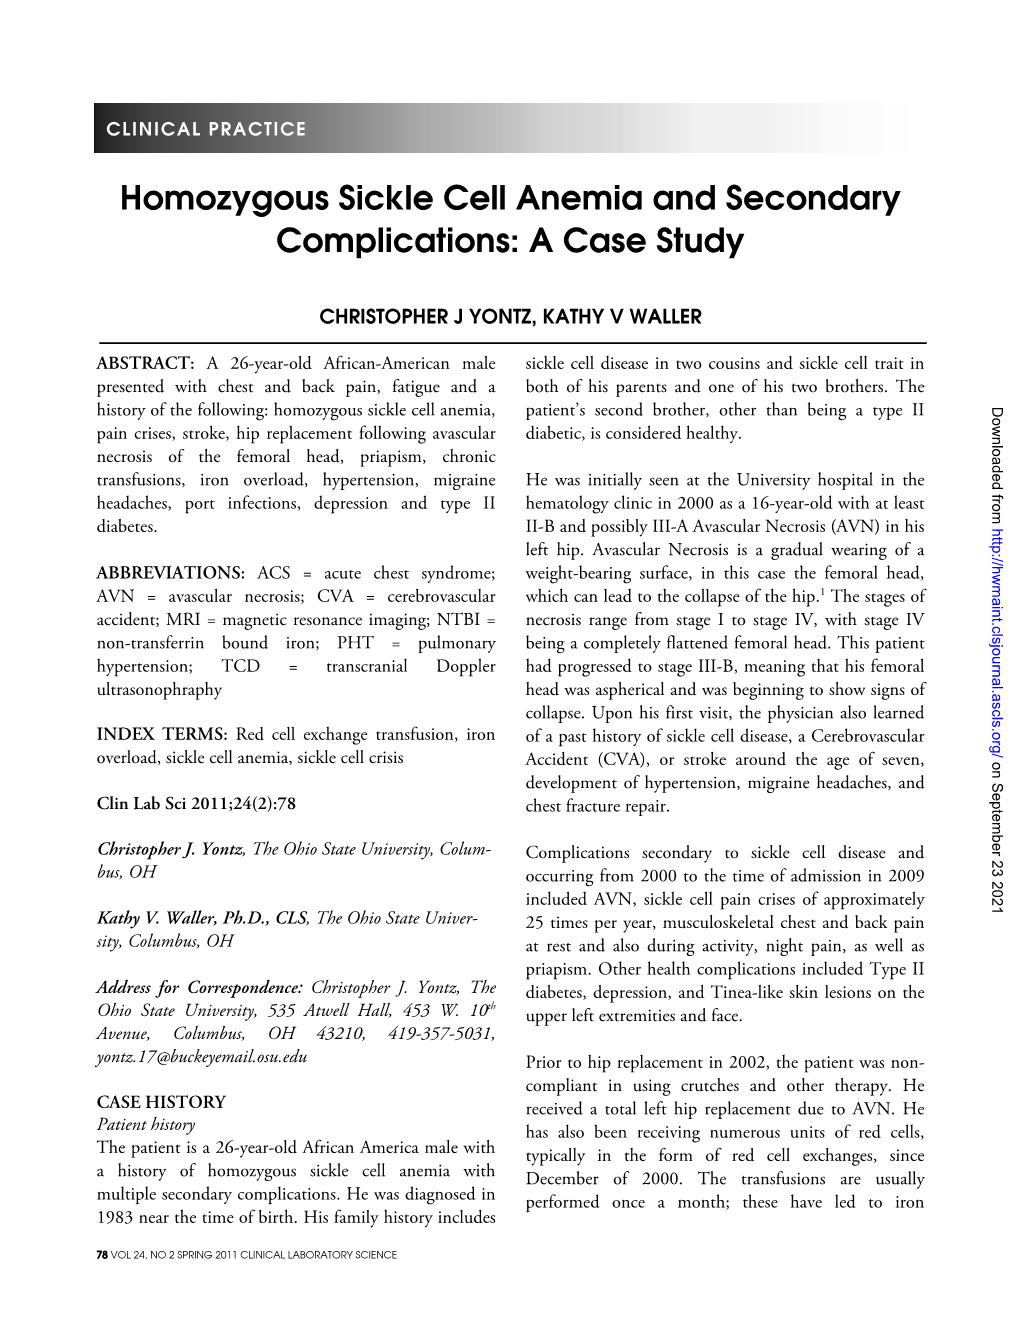 Homozygous Sickle Cell Anemia and Secondary Complications: a Case Study